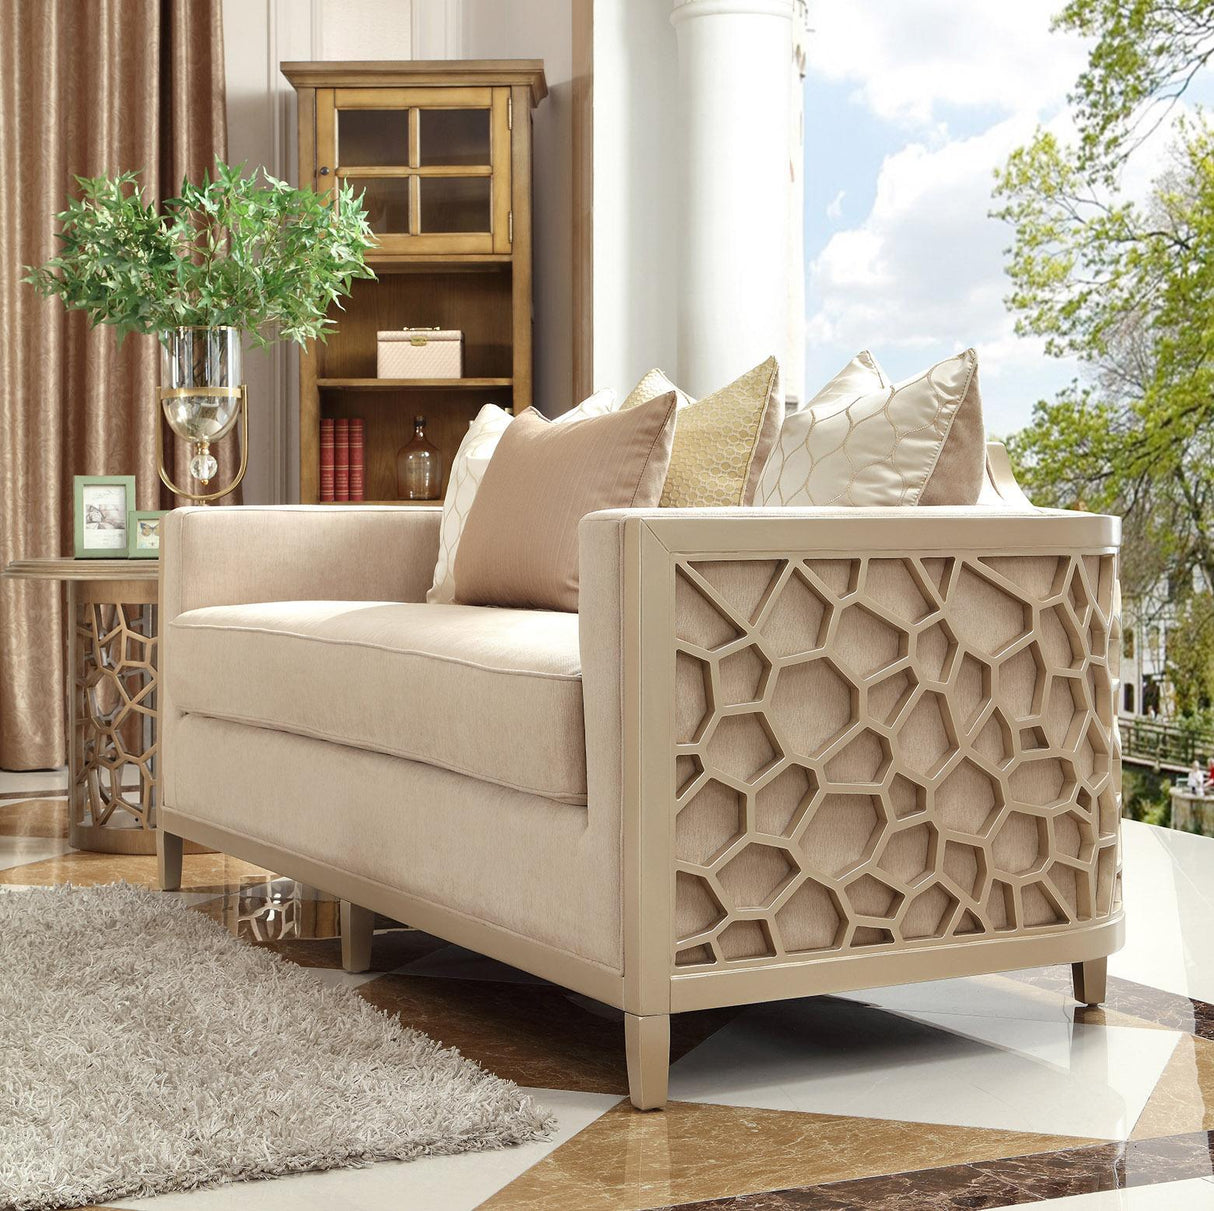 HD-8911 Traditional Sofa and Loveseat in Luxury Champagne Finish by Homey Design Homey Design Furniture